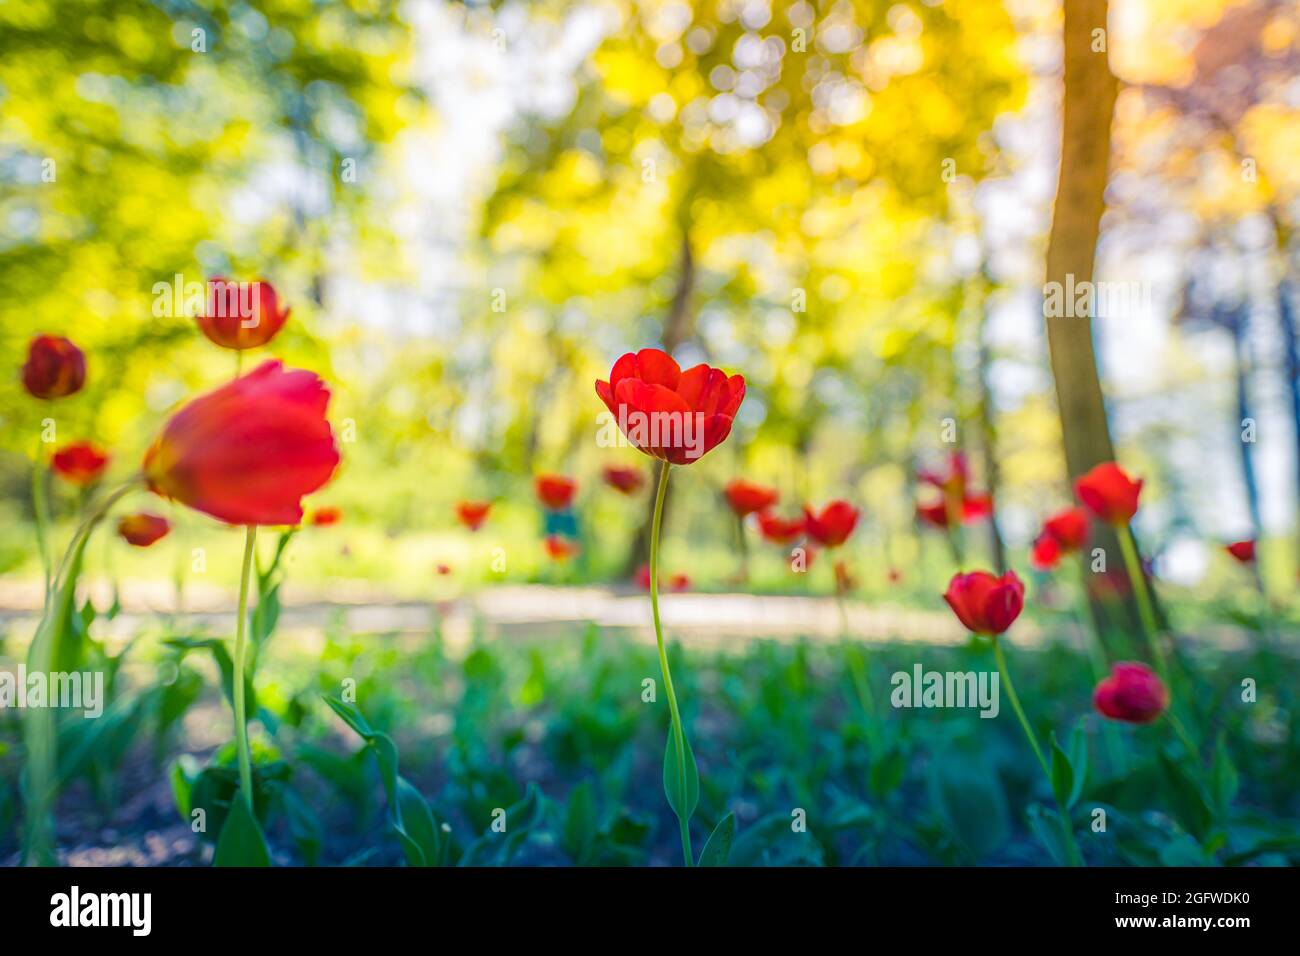 Group of red tulips. Spring landscape in forest park or garden. Idyllic beautiful nature scenic, closeup red floral view, blurred bokeh lush foliage Stock Photo